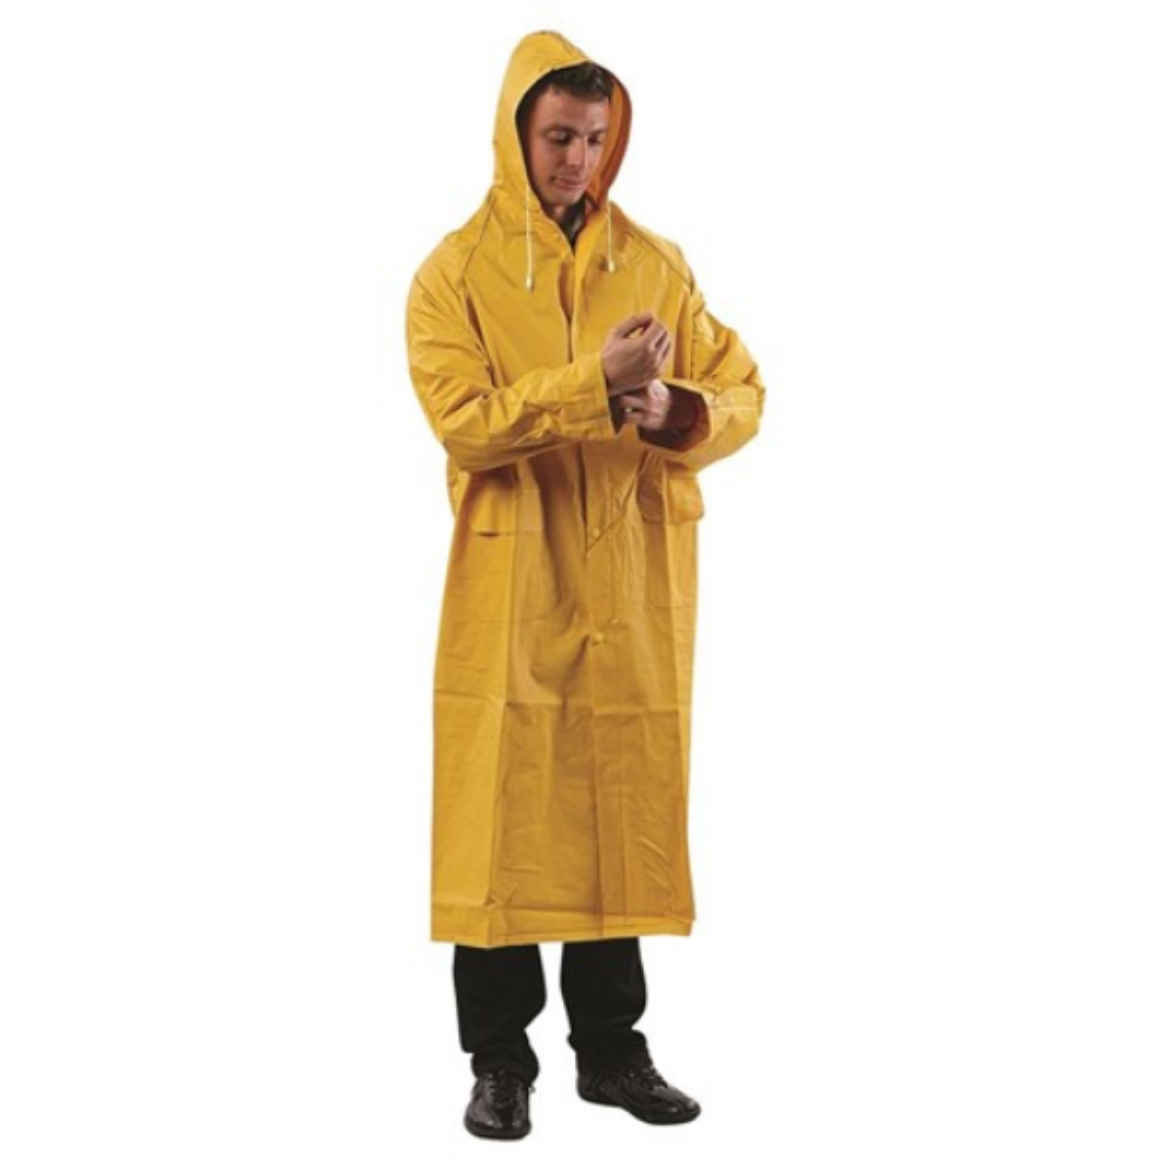 Picture of RAIN COAT - YELLOW PVC, FULL LENGTH. AVAILABLE IN SIZES S/M/L/XL/2XL/3XL/4XL